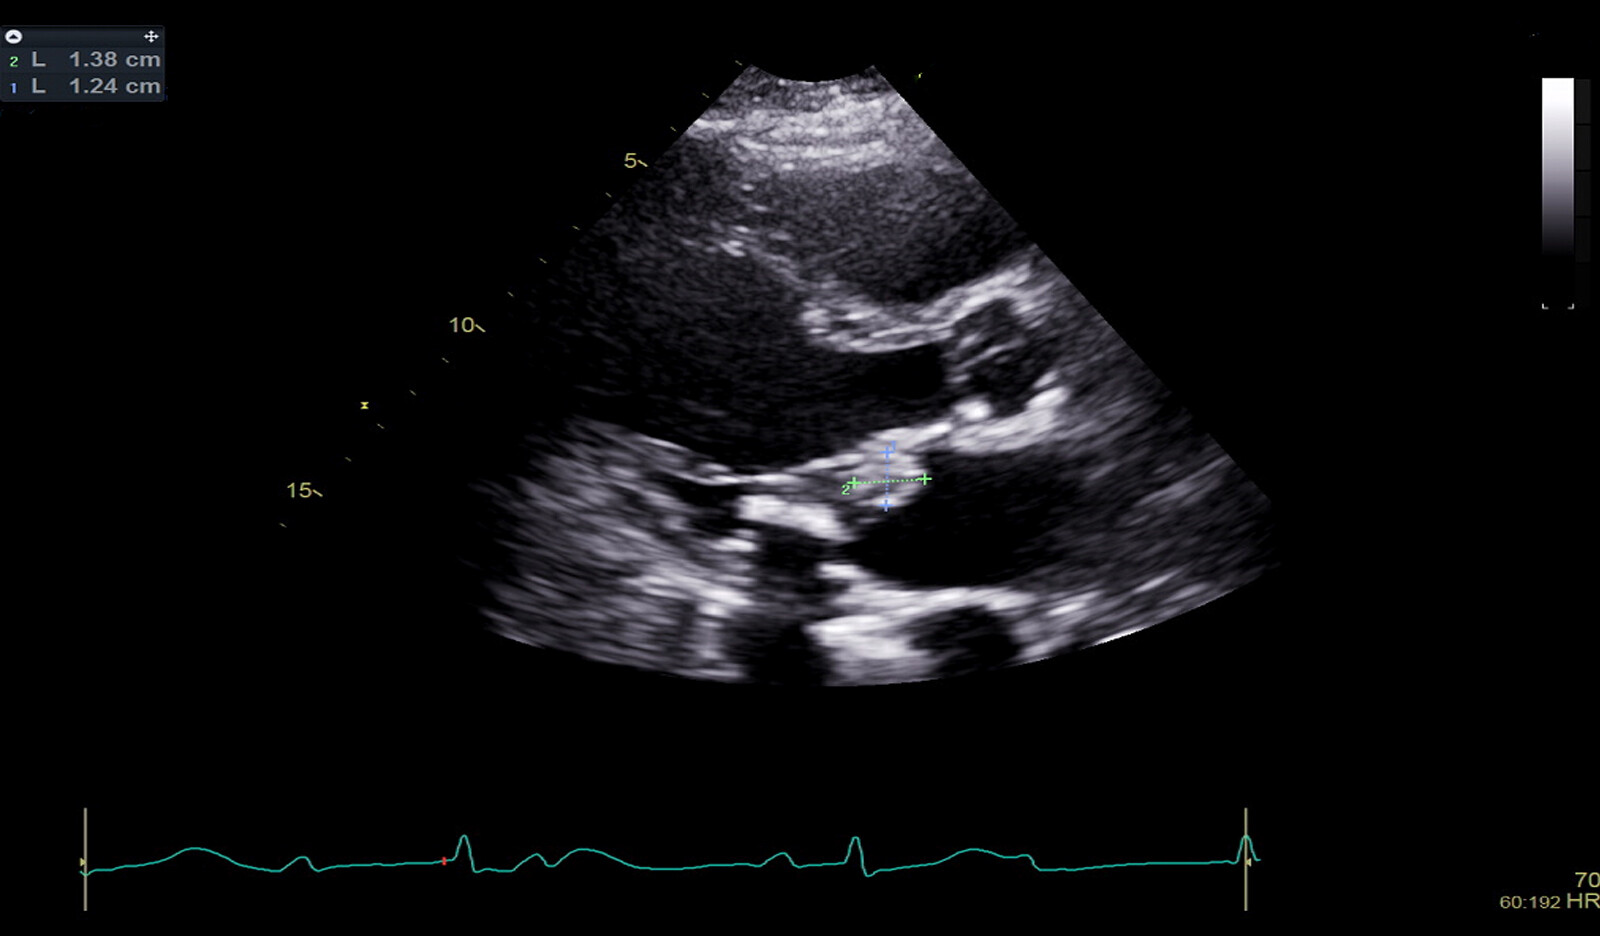 Image of PoCUS pericardial effusion obstructive shock EHR data abrupt clinical deterioration    Online PoCUS Training